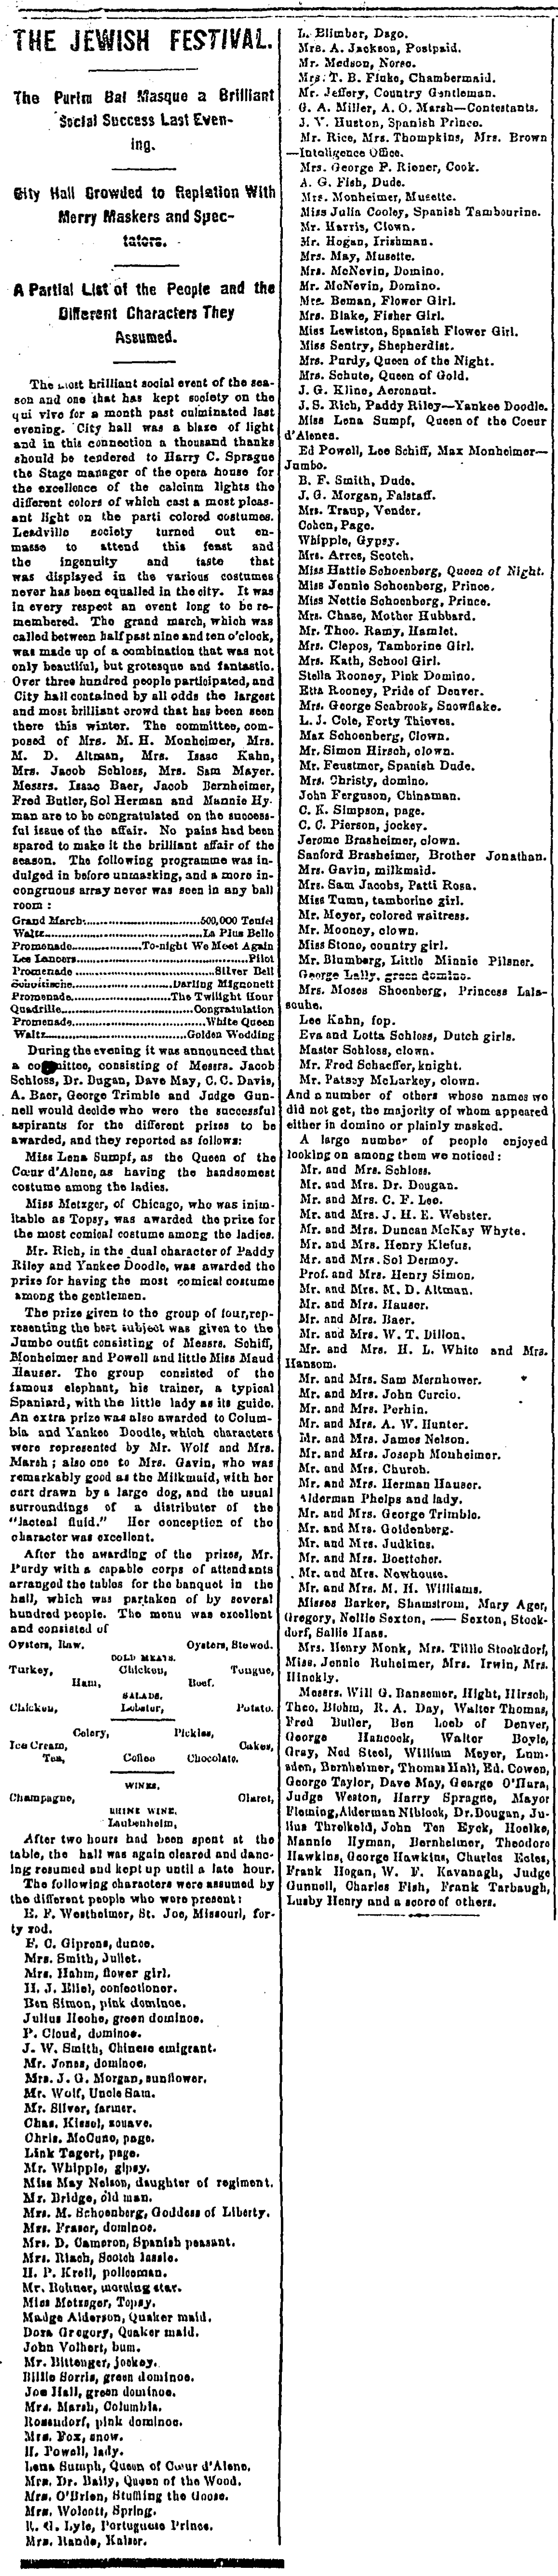 Leadville Daily Herald. Wednesday, March 12, 1884.